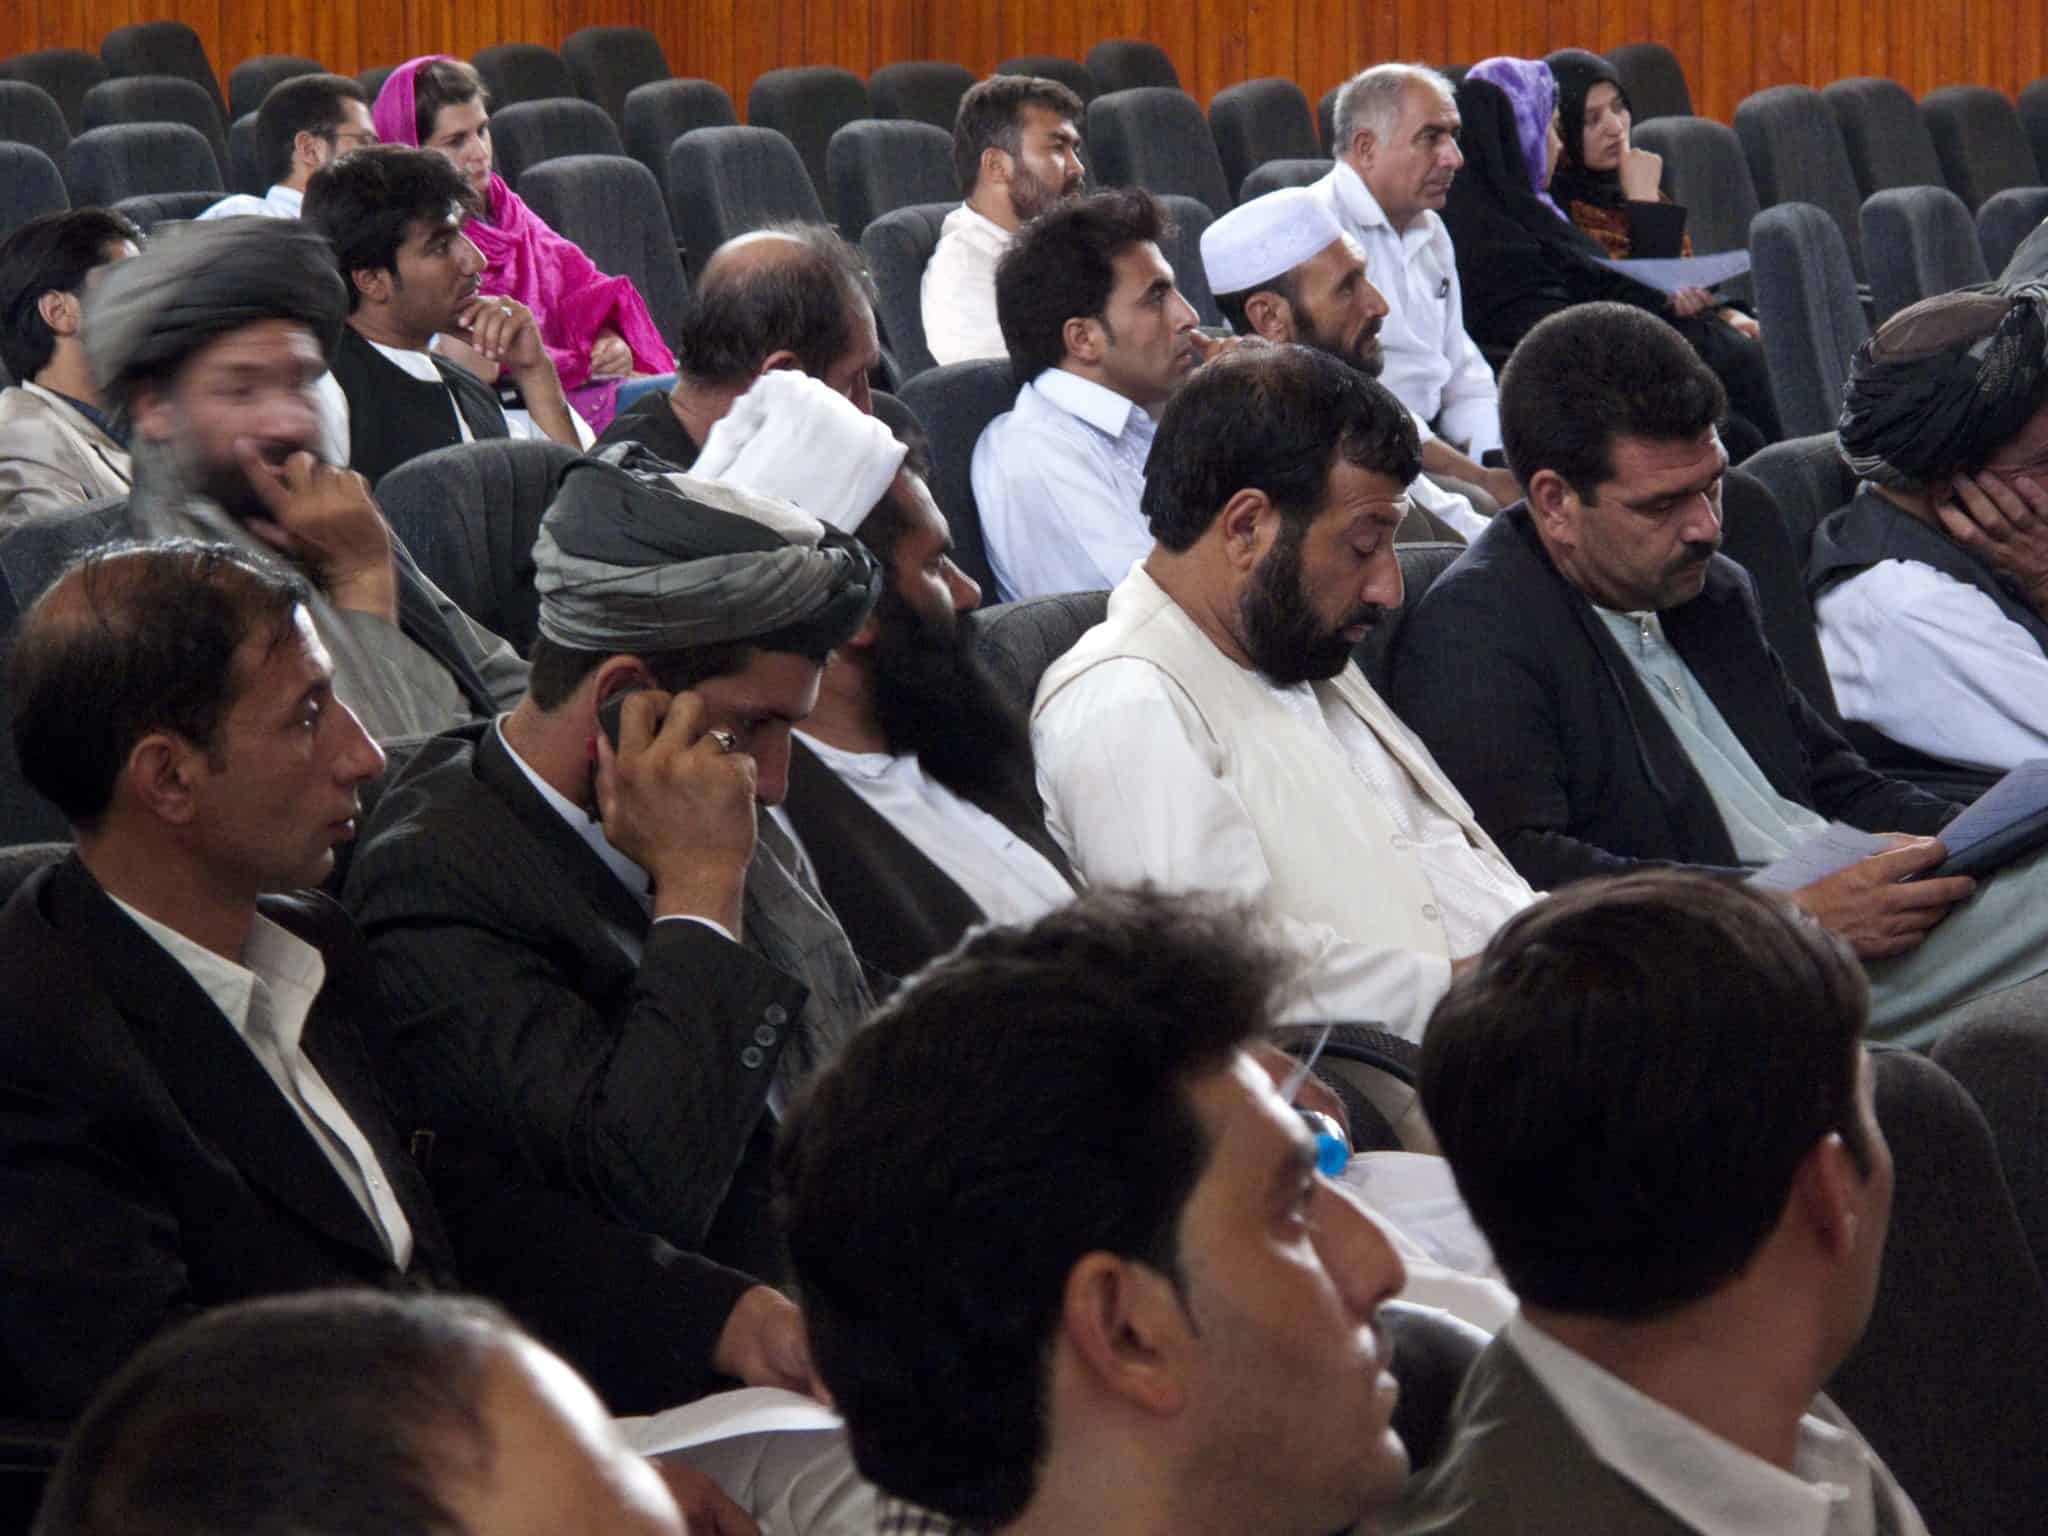 Sonia during a UNDP held meeting in Herat, Afghanistan with local candidates.